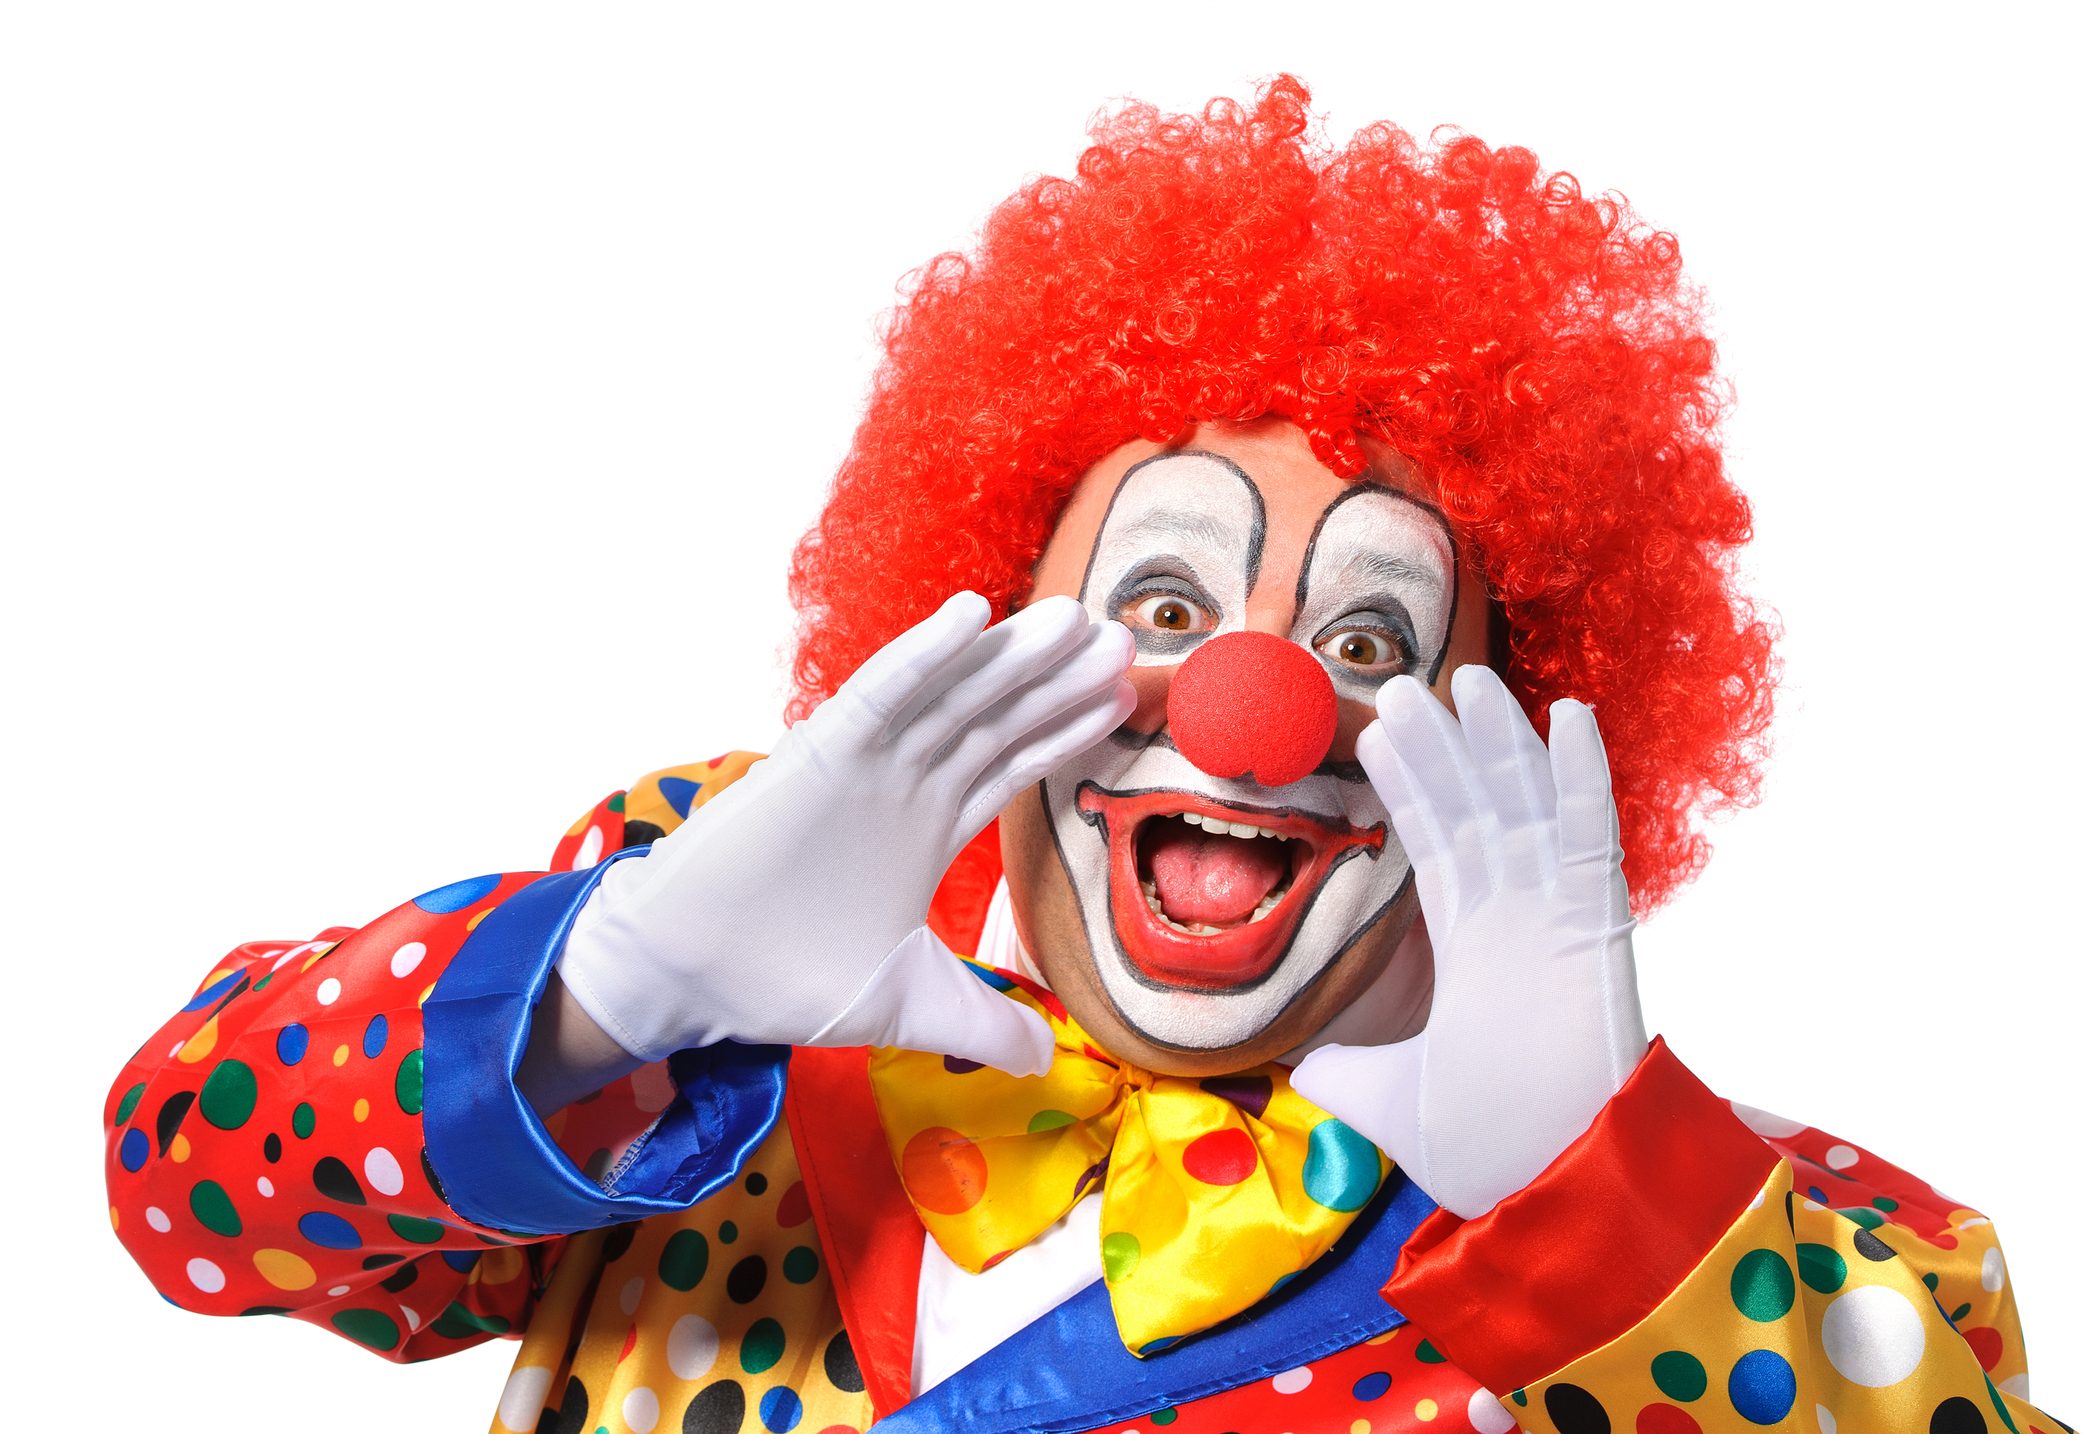 Mom Cheating on Husband With Clown Hired for Her Kid's Birthday Sparks Fury